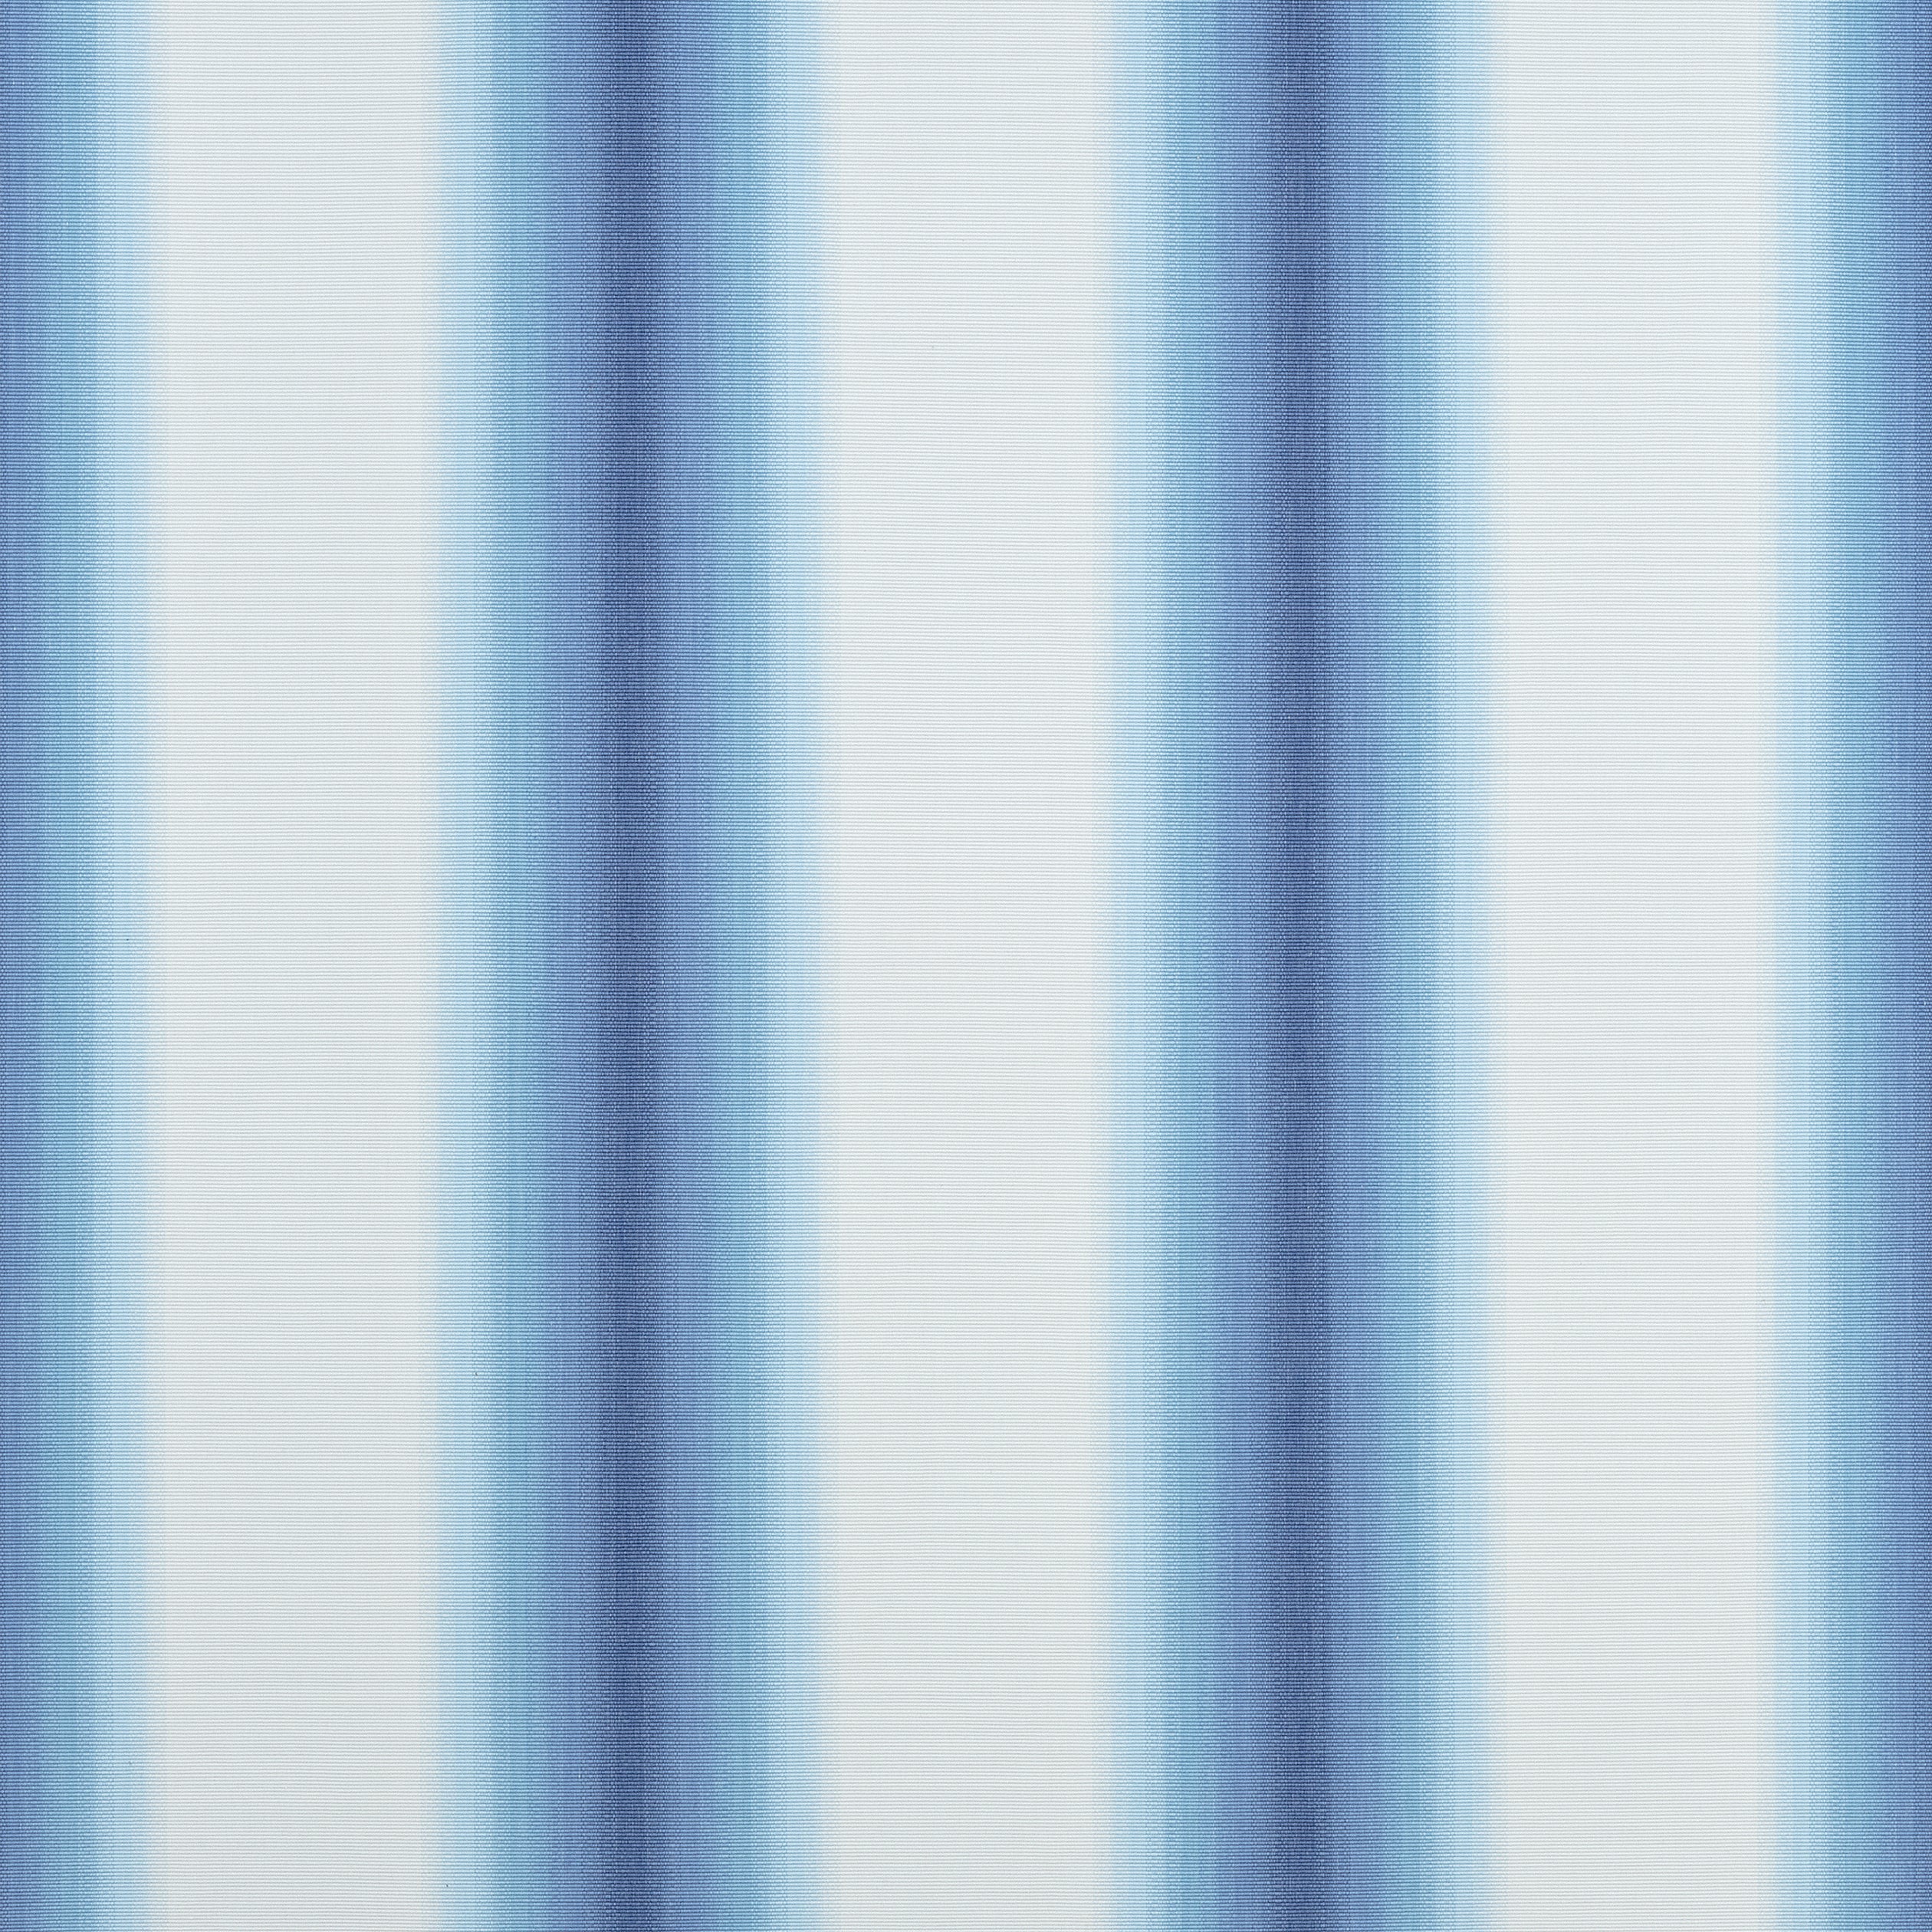 Stockton Stripe fabric in blue color - pattern number W775493 - by Thibaut in the Dynasty collection